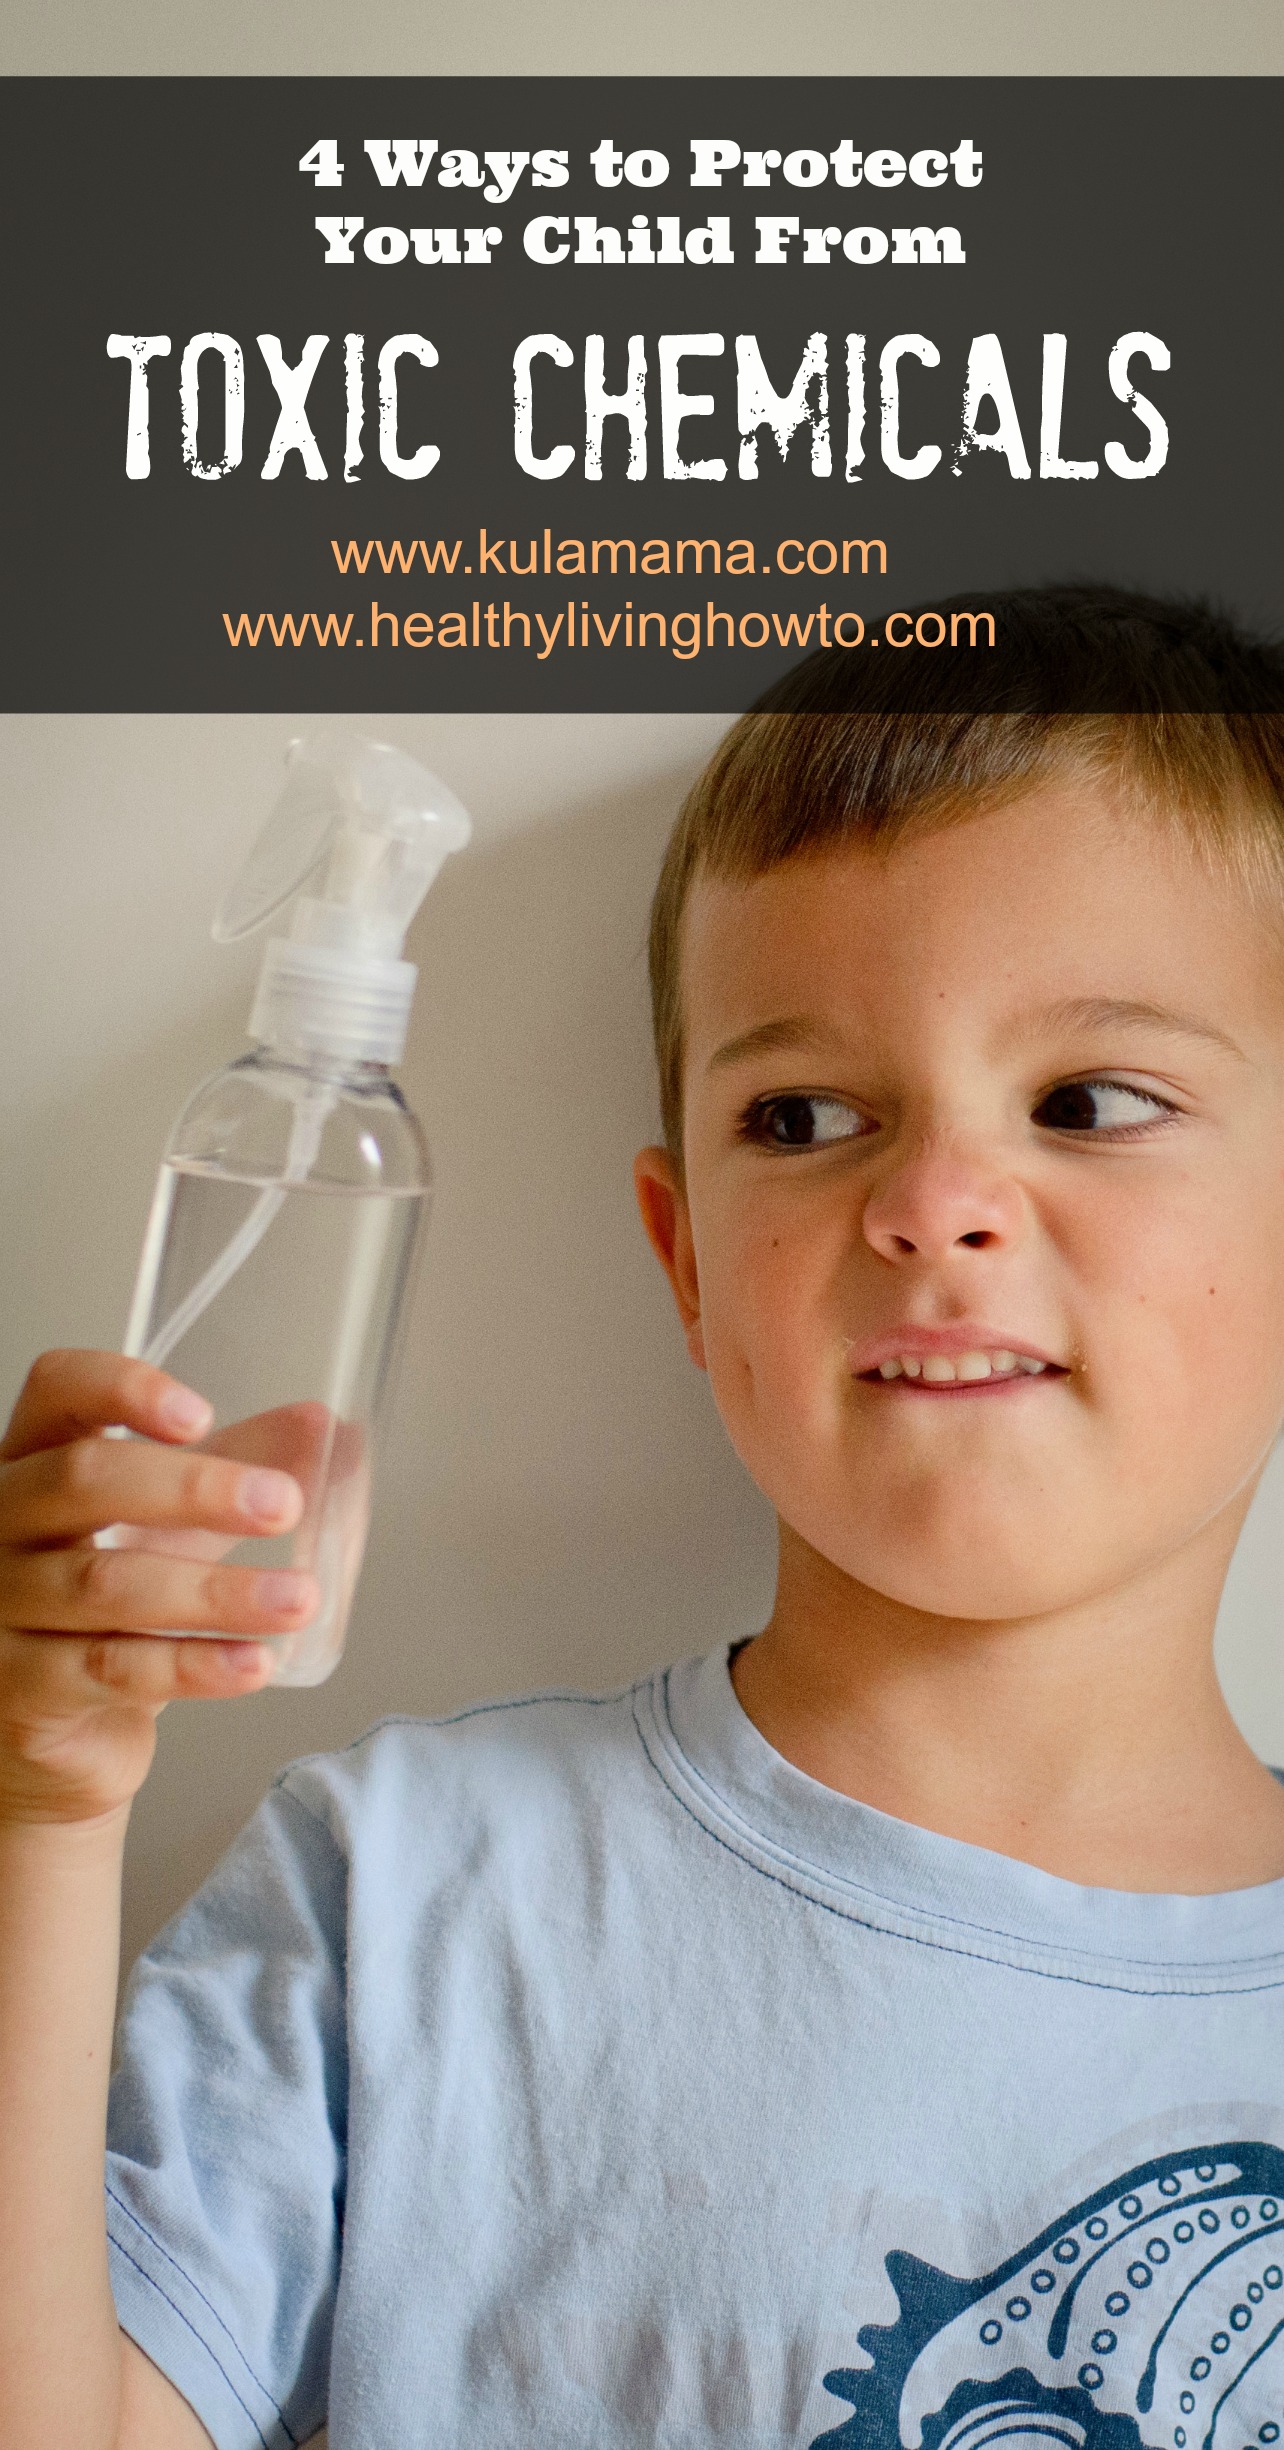 4 ways to protect your child from toxic chemicals www.kulamama.com for www.healthylivinghowto.com